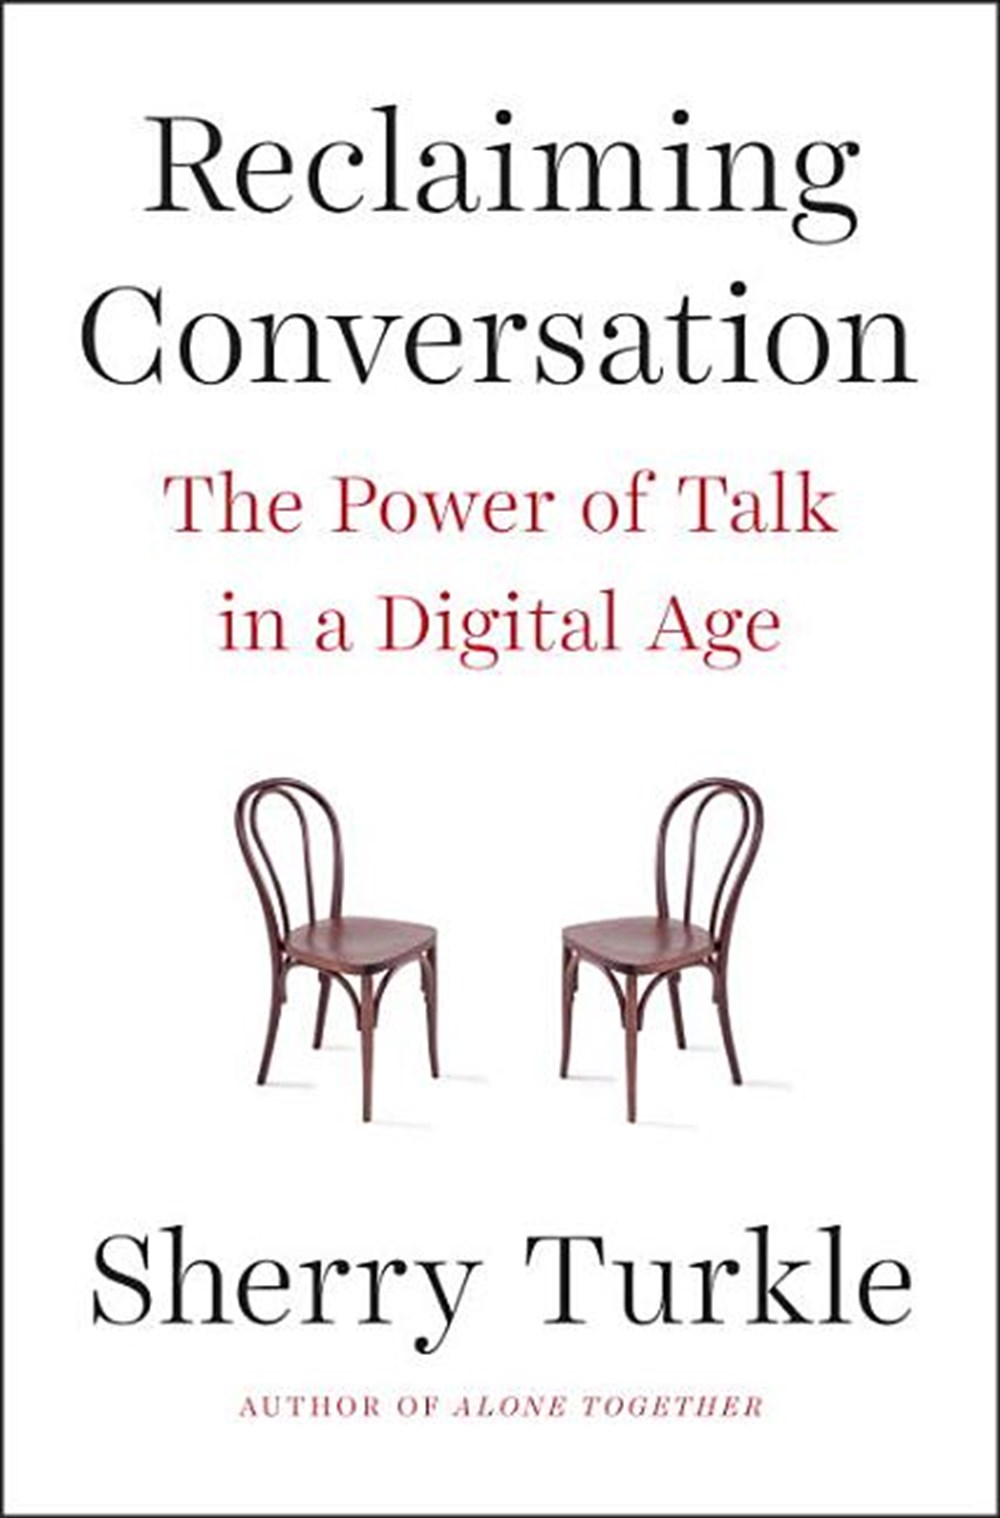 Reclaiming Conversation The Power of Talk in a Digital Age